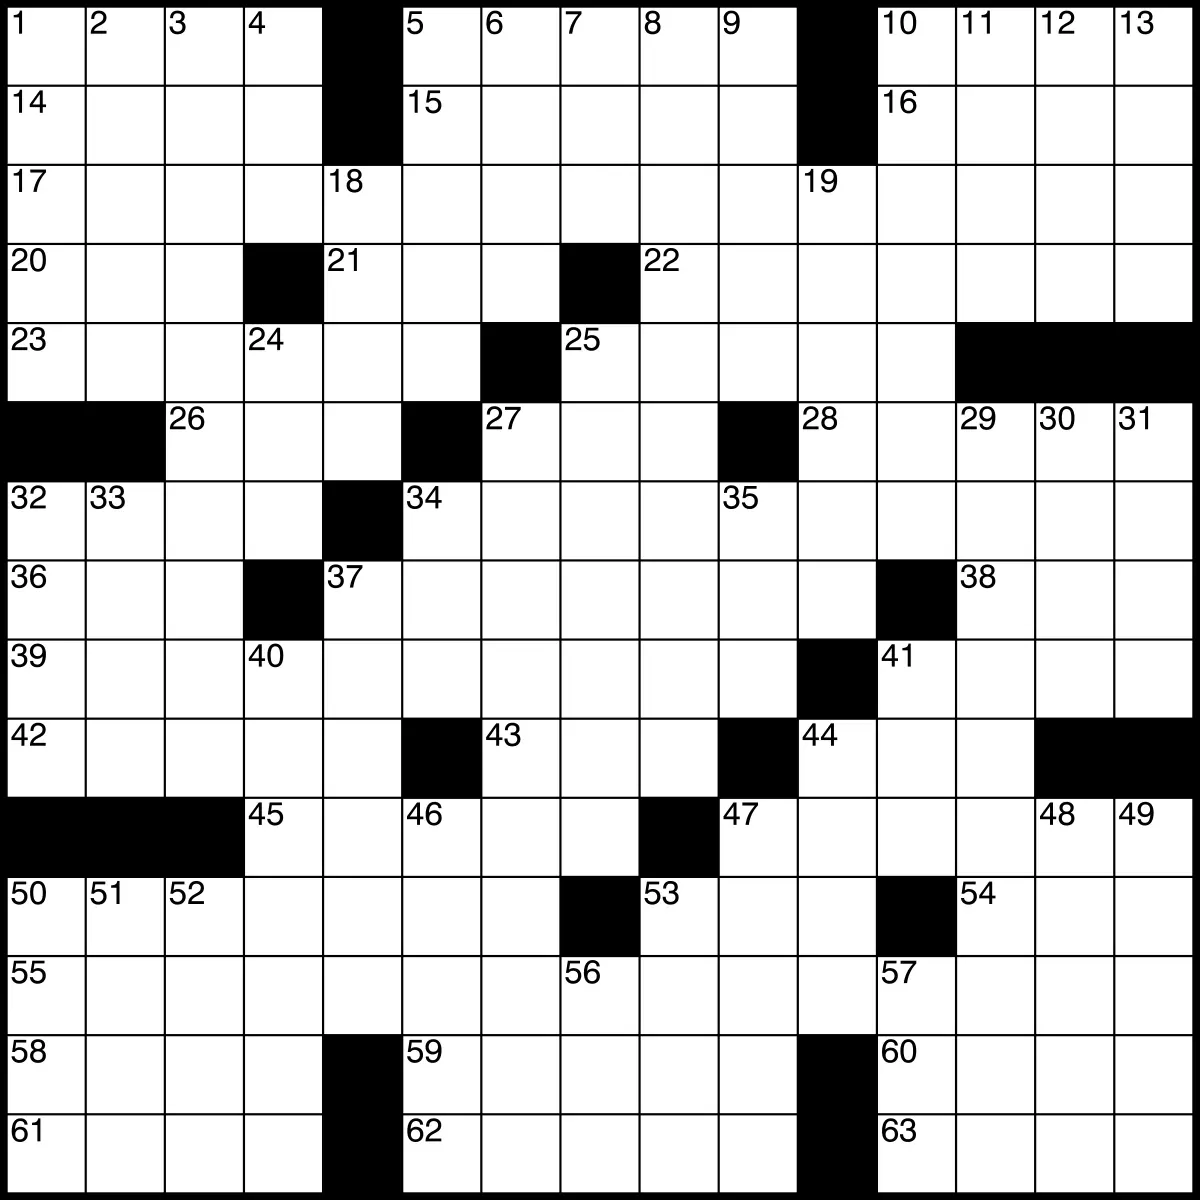 hewlett packard rival crossword - What is crossword competition